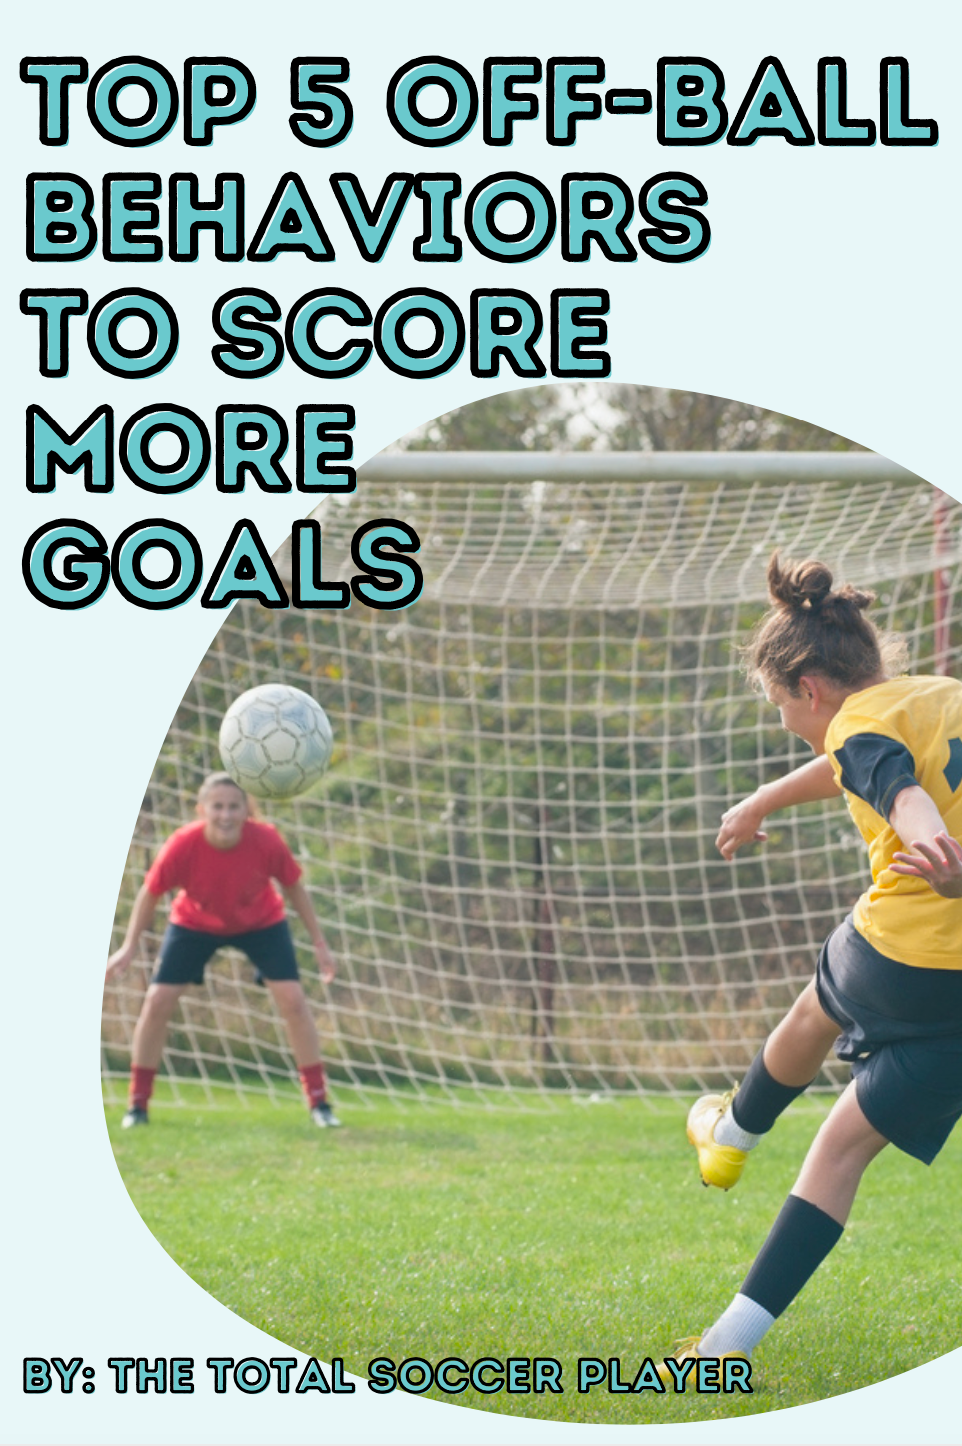 The Top 5 Off-Ball Behaviors To Score More Goals and Cause Havoc on the Defense